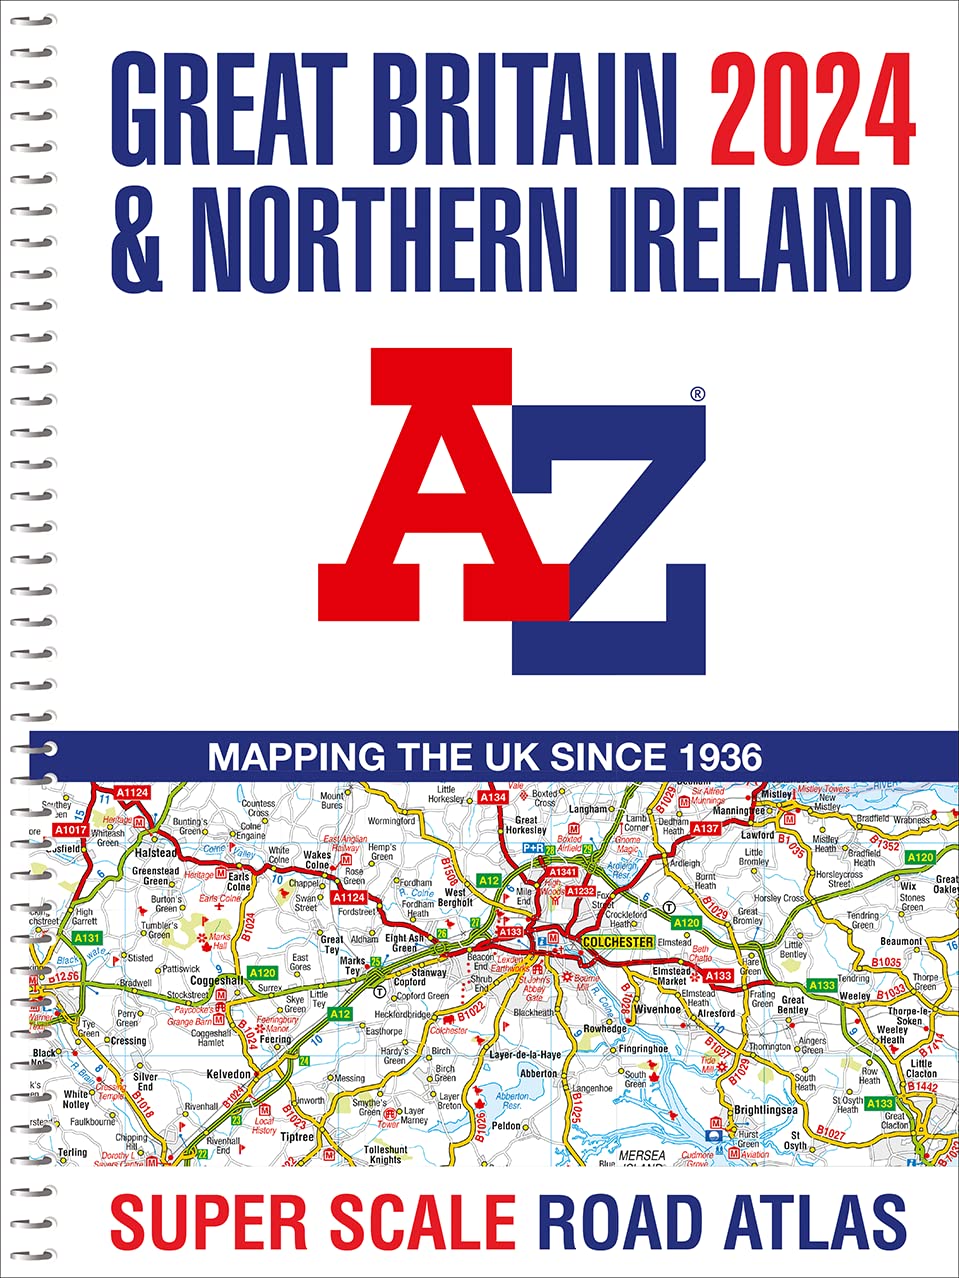 Great Britain Super Scale Road Atlas by A-Z Maps (2024)